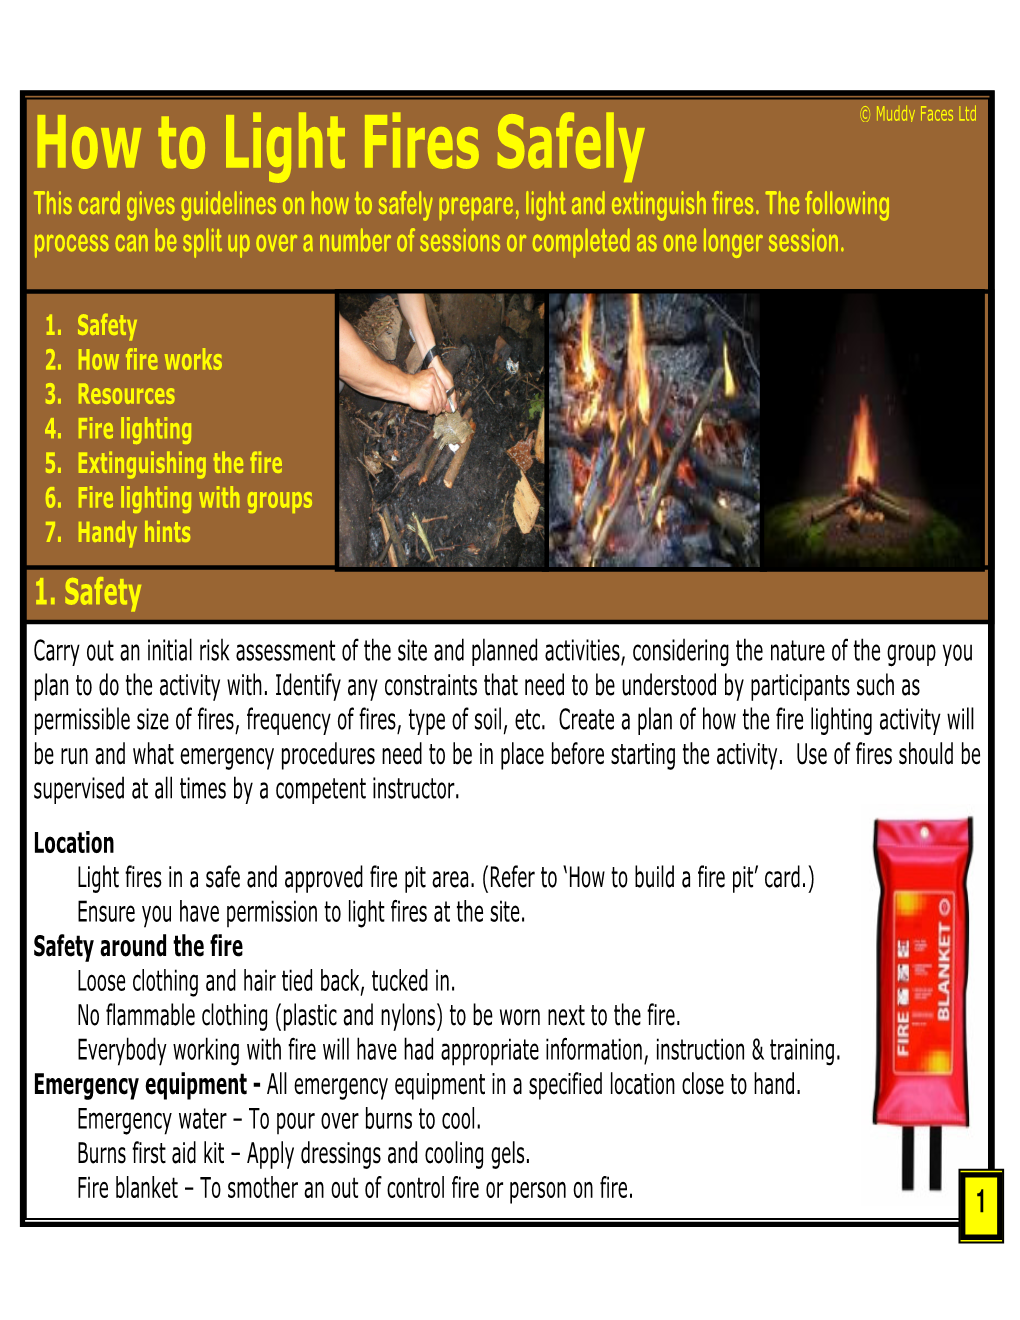 How to Light Fires Safely This Card Gives Guidelines on How to Safely Prepare, Light and Extinguish Fires